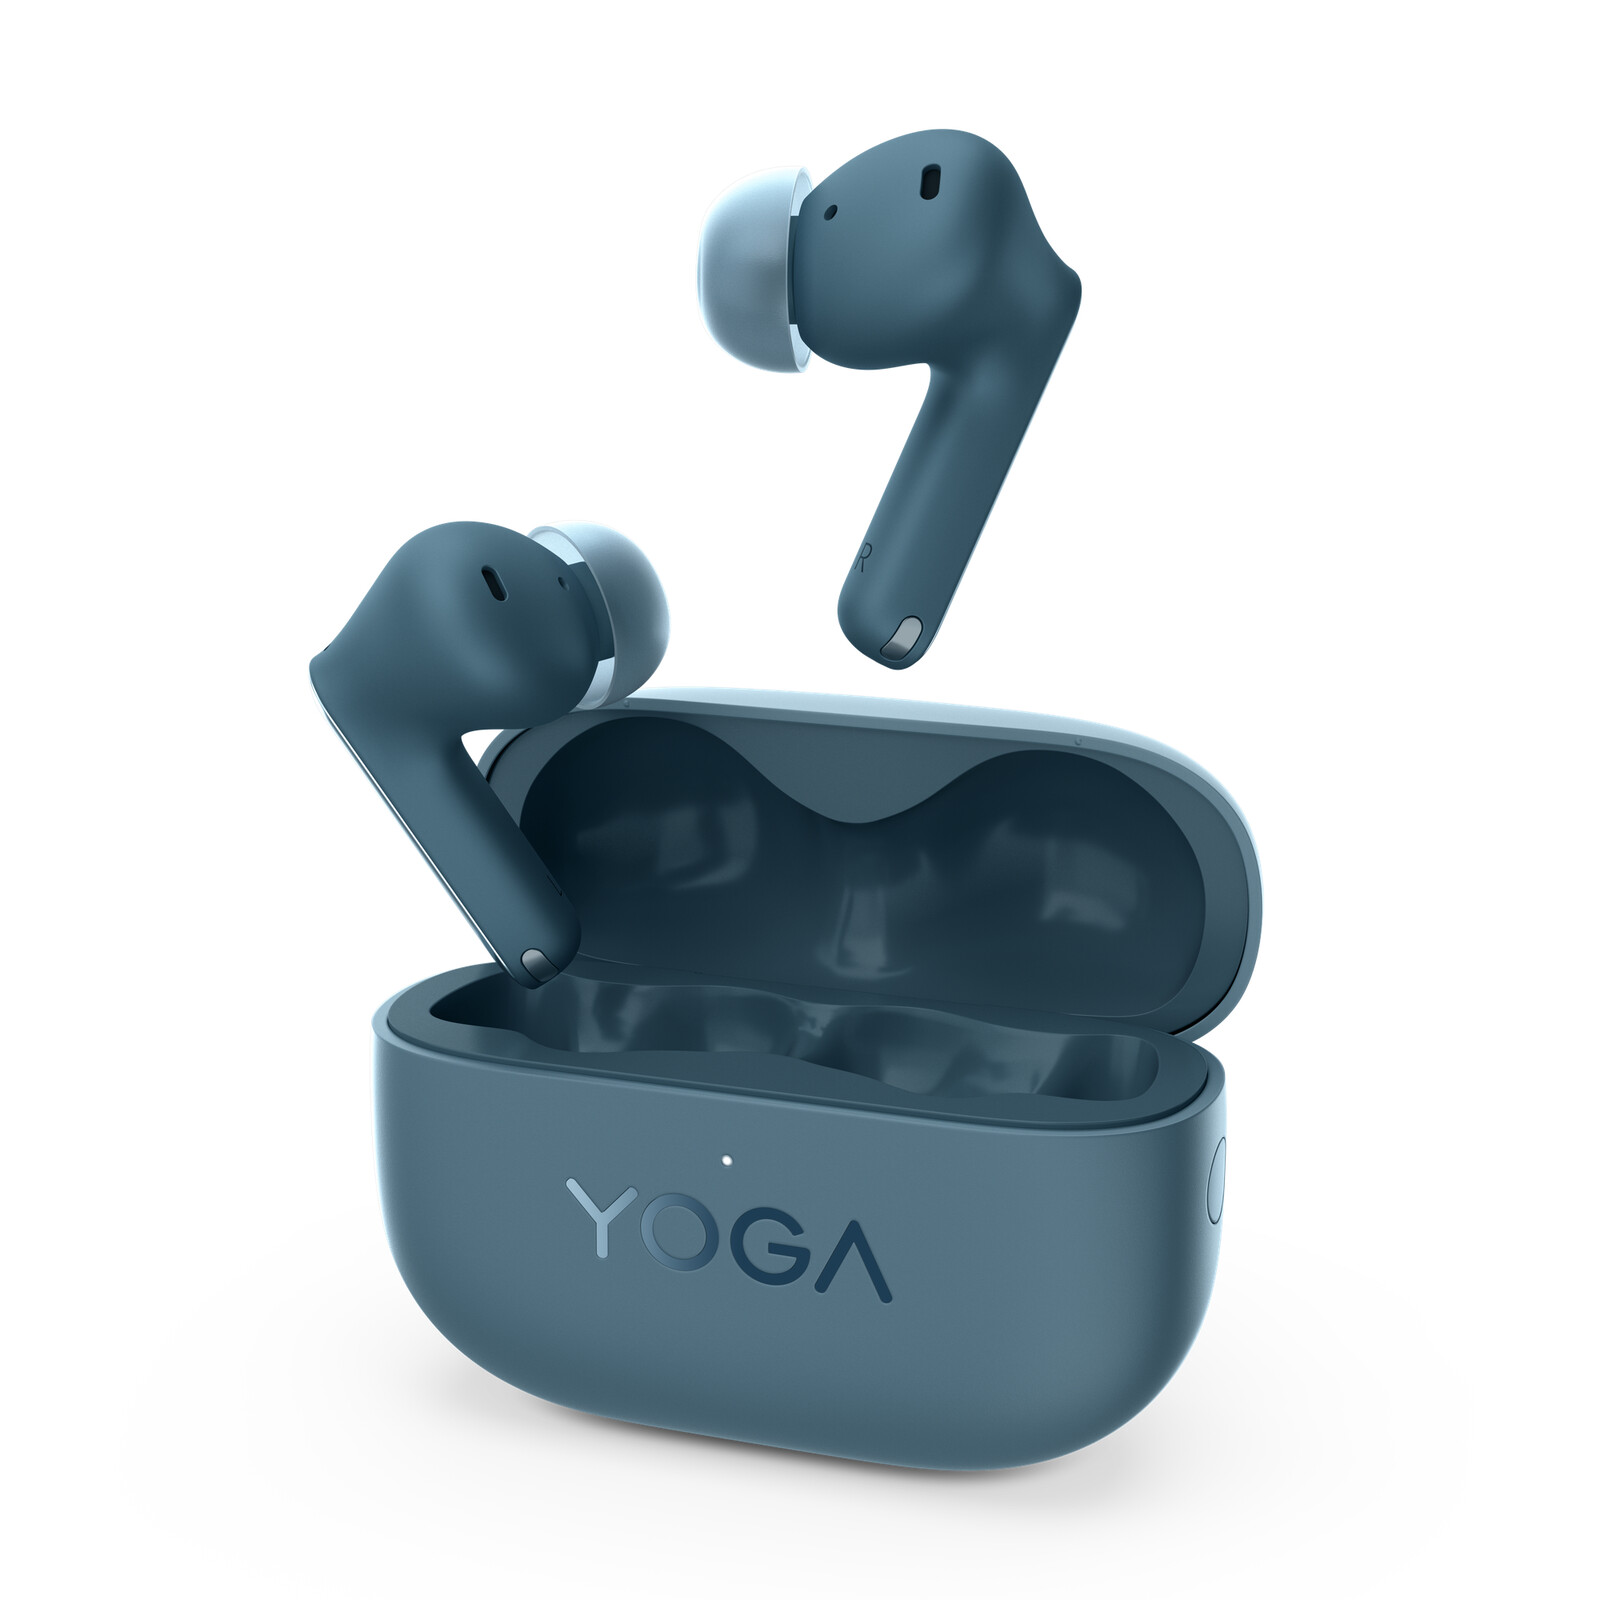 Lenovo Yoga True Wireless Stereo Earbuds debut as new Yoga PC